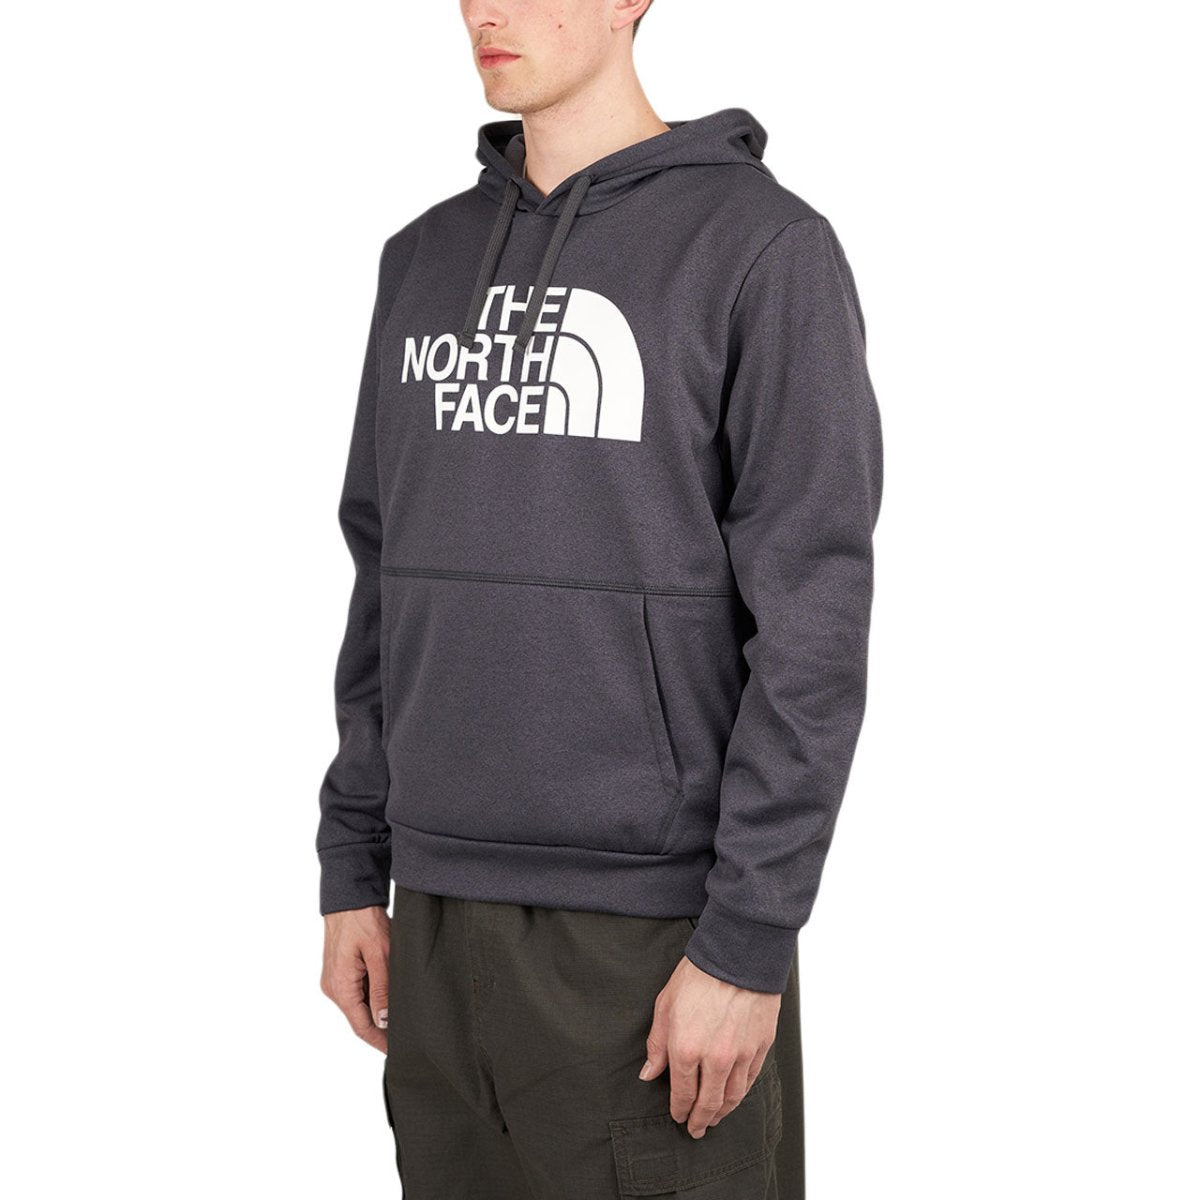 The North Face Exploration Hoodie (Dunkelgrau)  - Allike Store